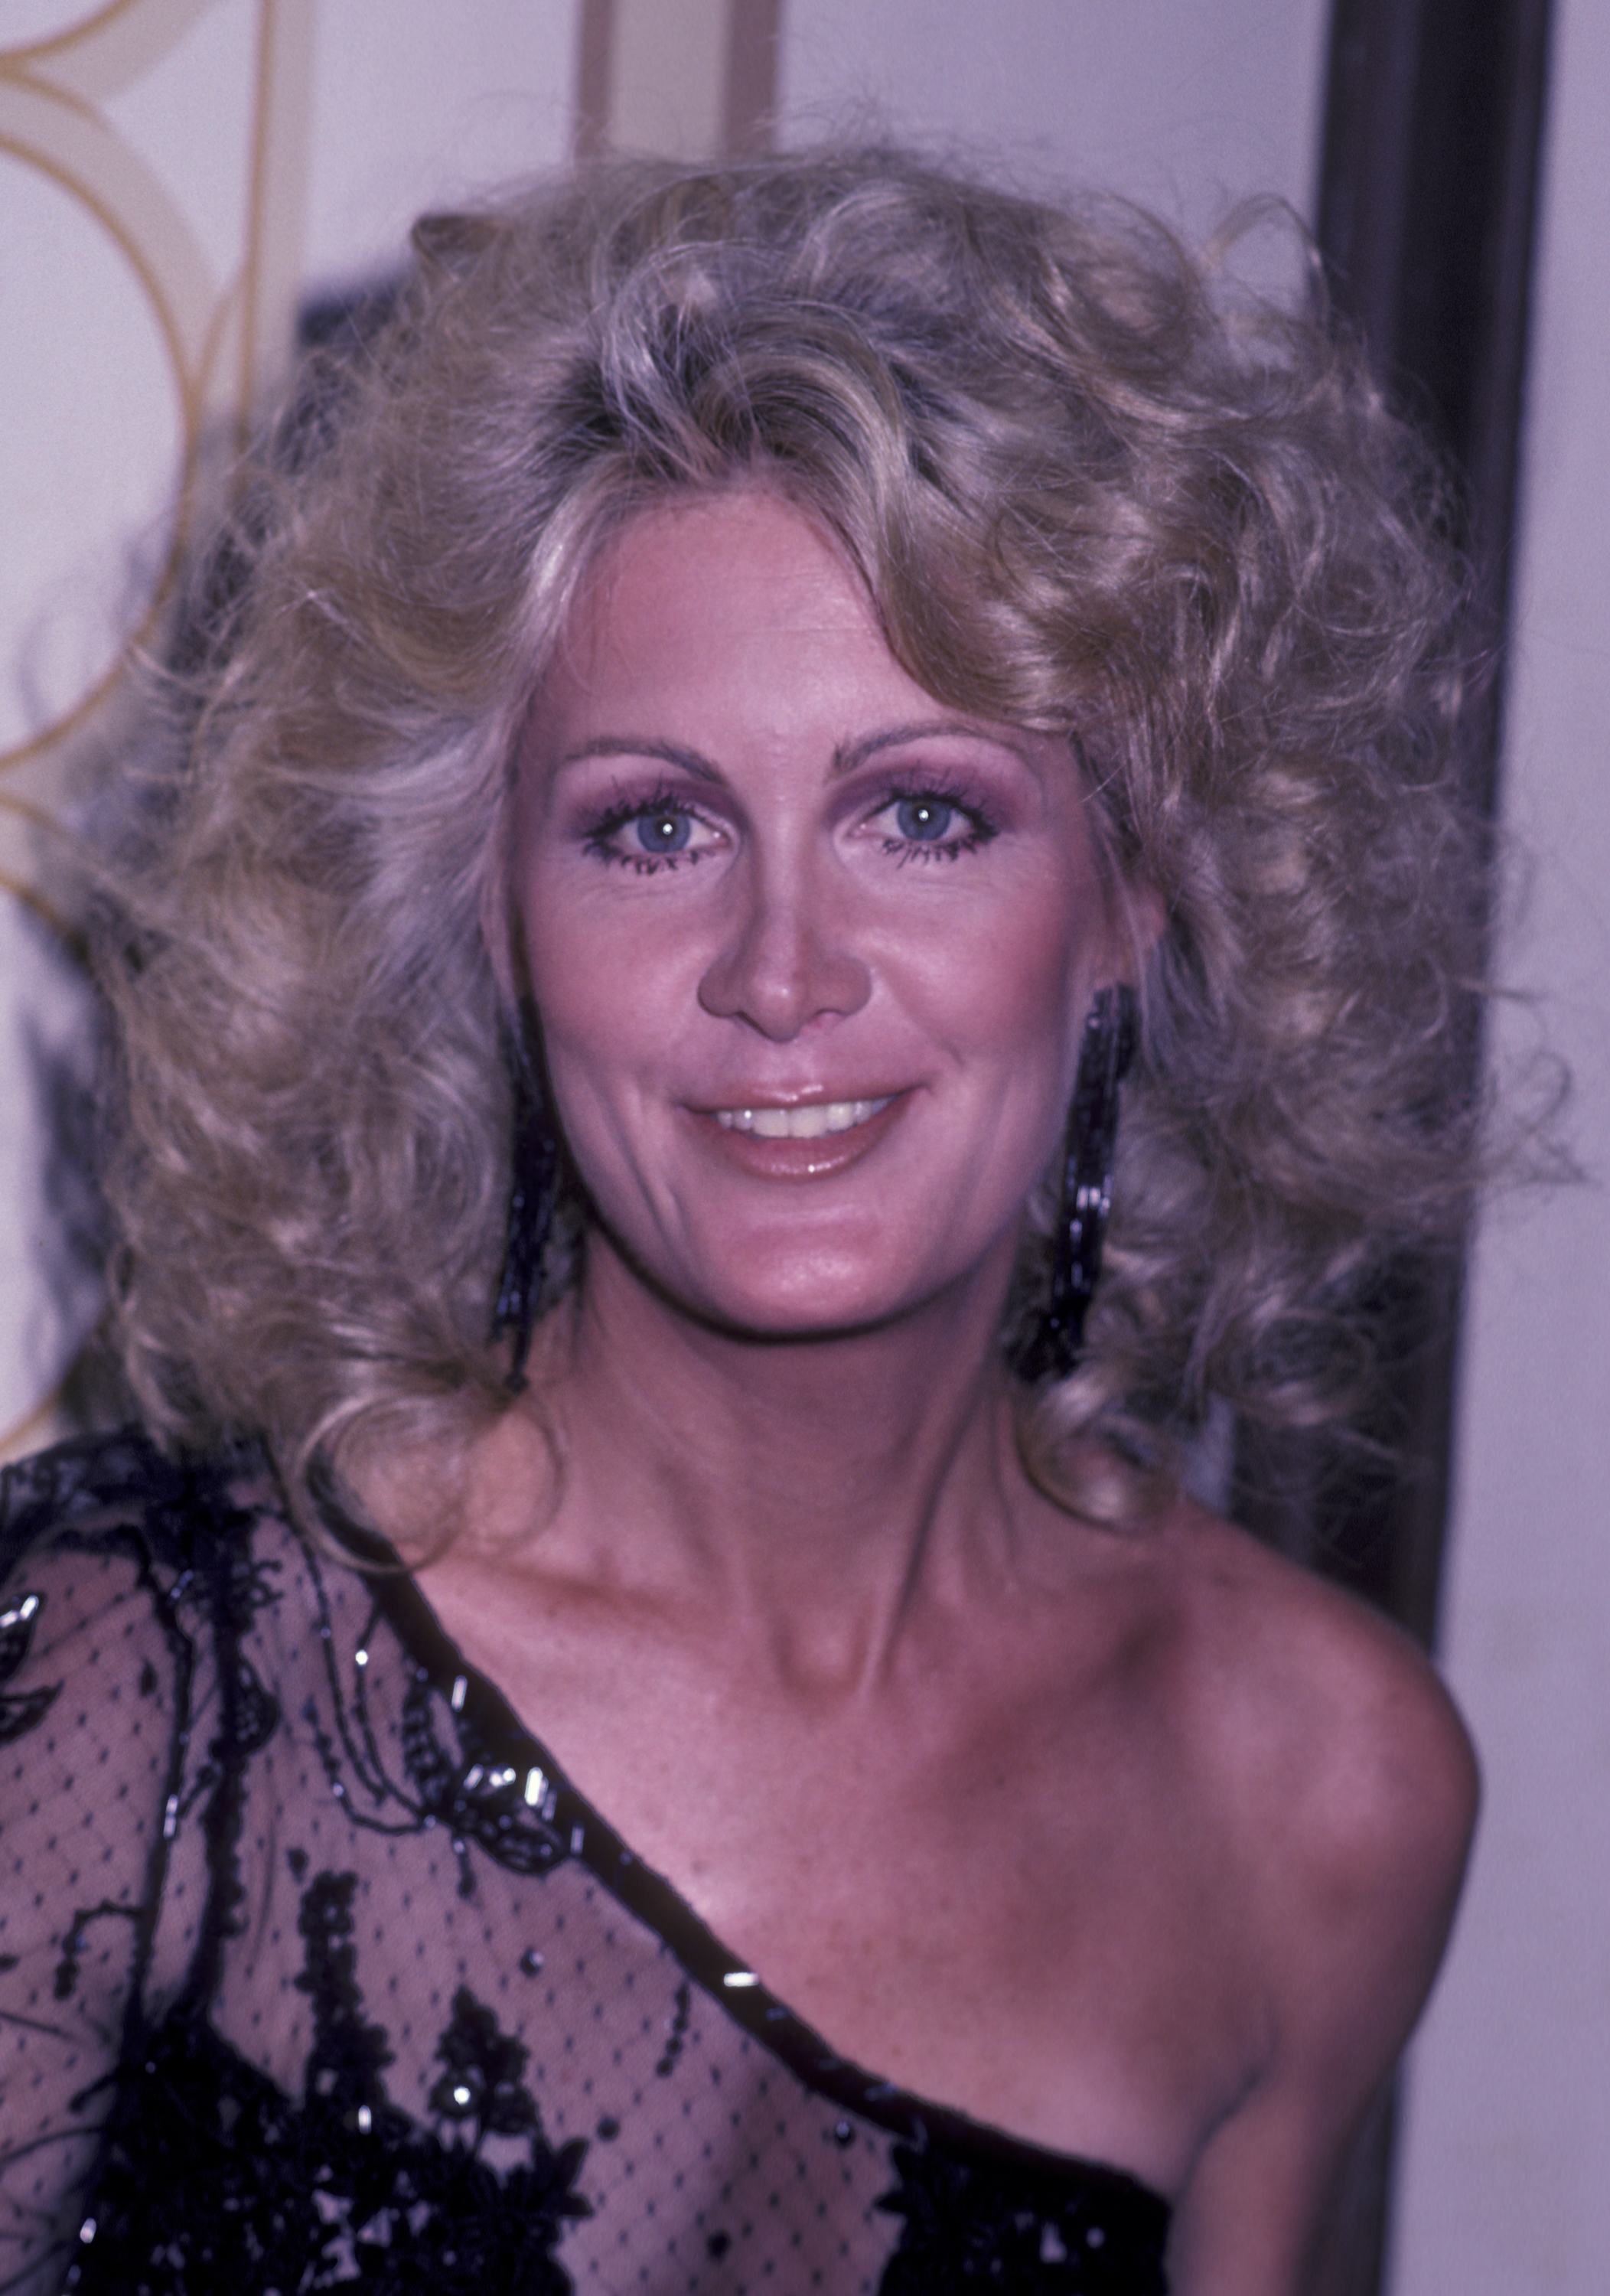 Joan Van Ark attends 23rd Annual International Broadcasting Awards on March 15, 1982 at the Century Plaza Hotel in Century City, California. | Source: Getty Images